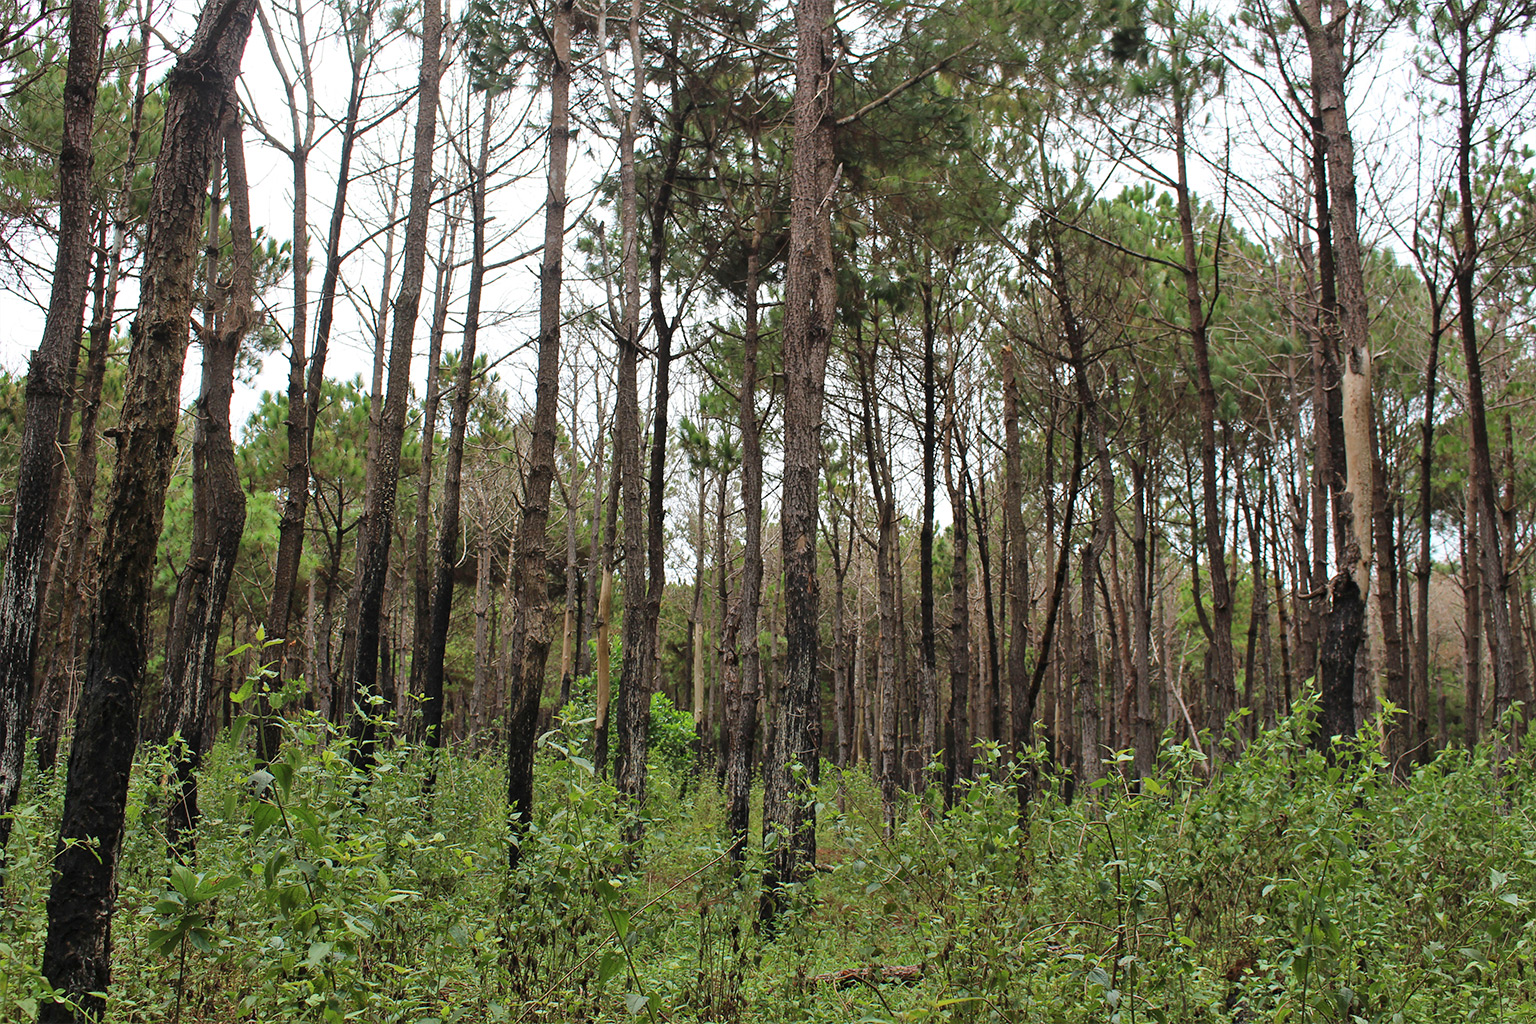 A part of the Dak Doa pine forest.